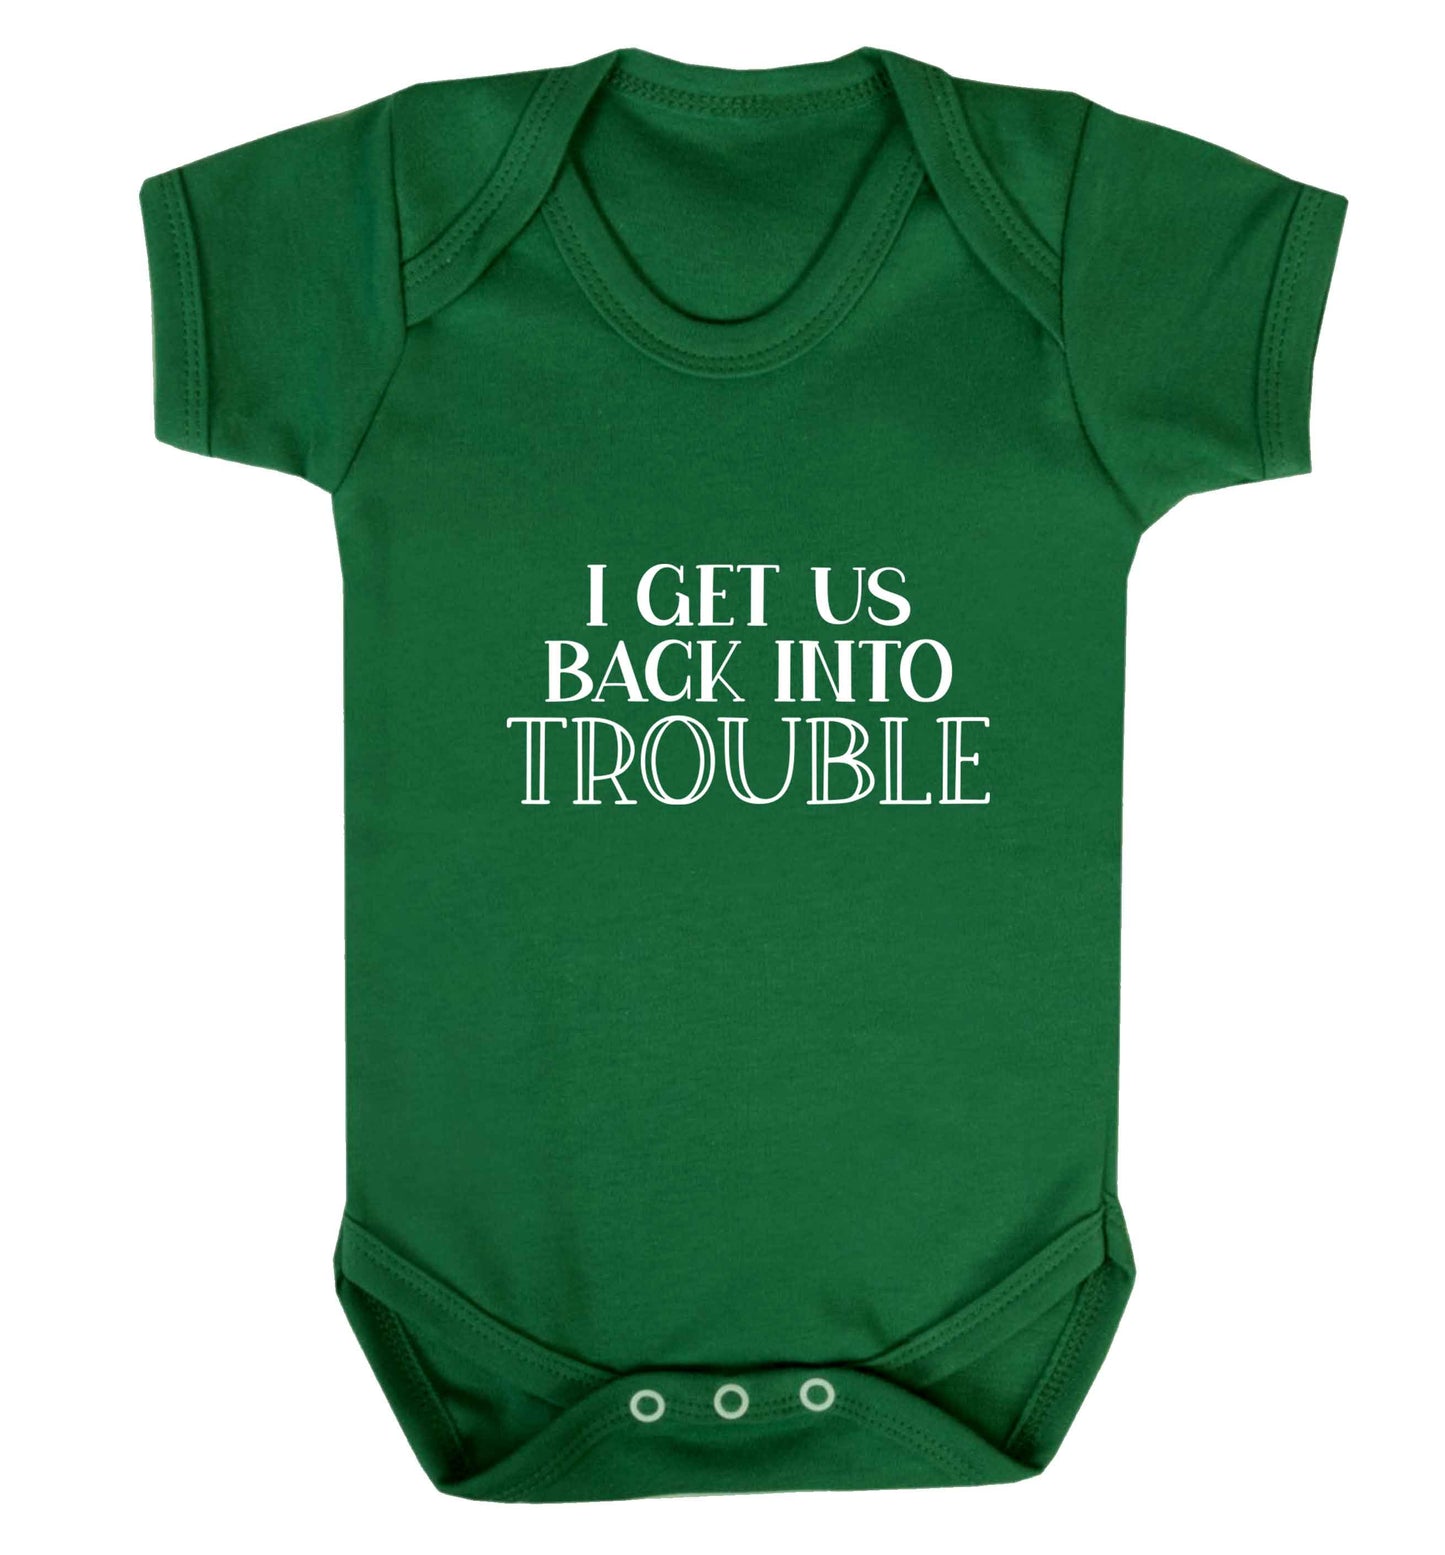 I get us back into trouble baby vest green 18-24 months